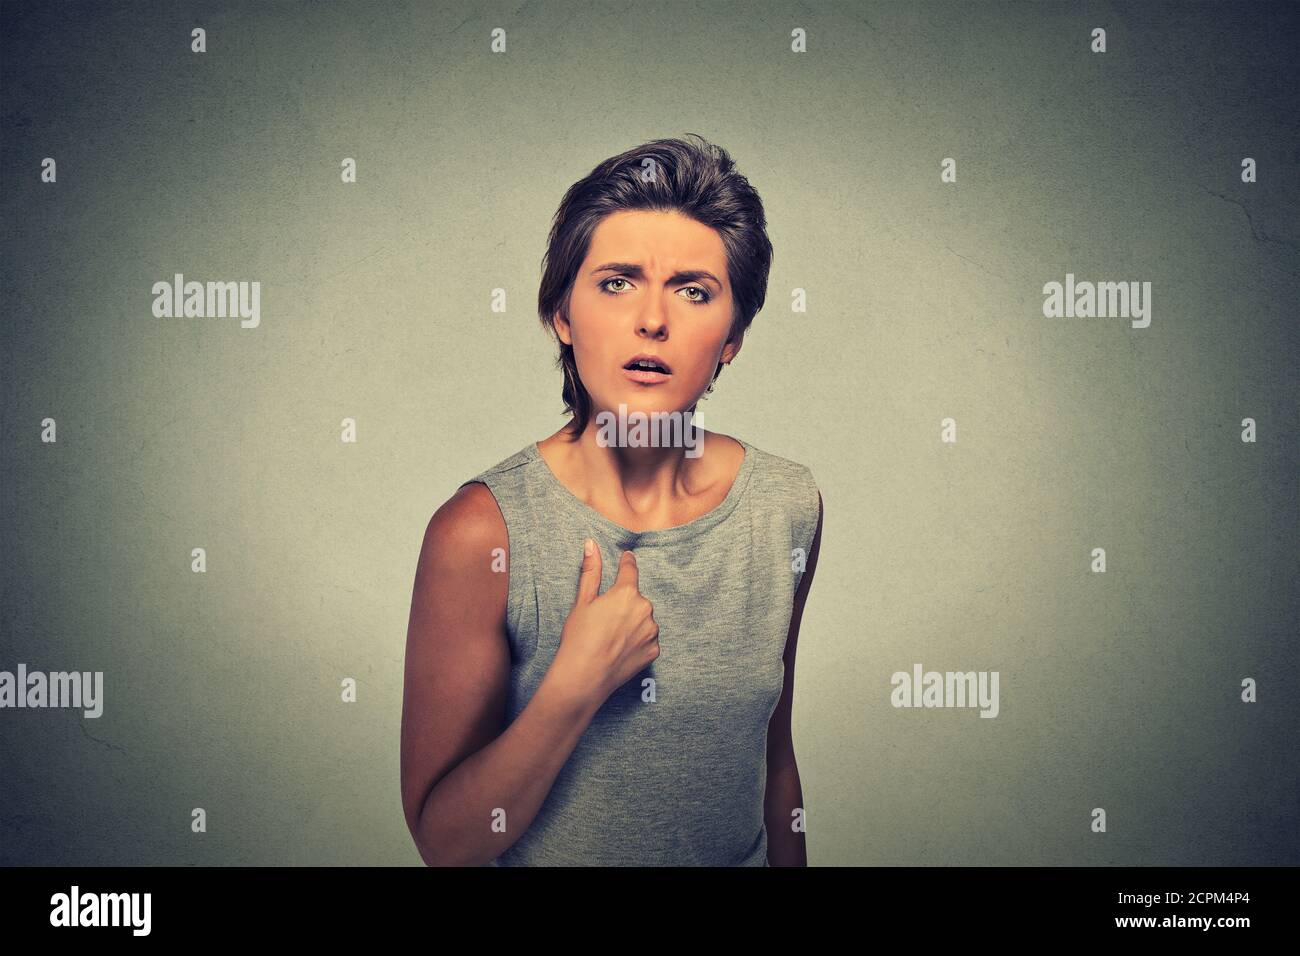 Portrait angry, unhappy, annoyed young woman, getting mad asking question you talking to me, you mean me? Isolated on gray wall background. Negative e Stock Photo